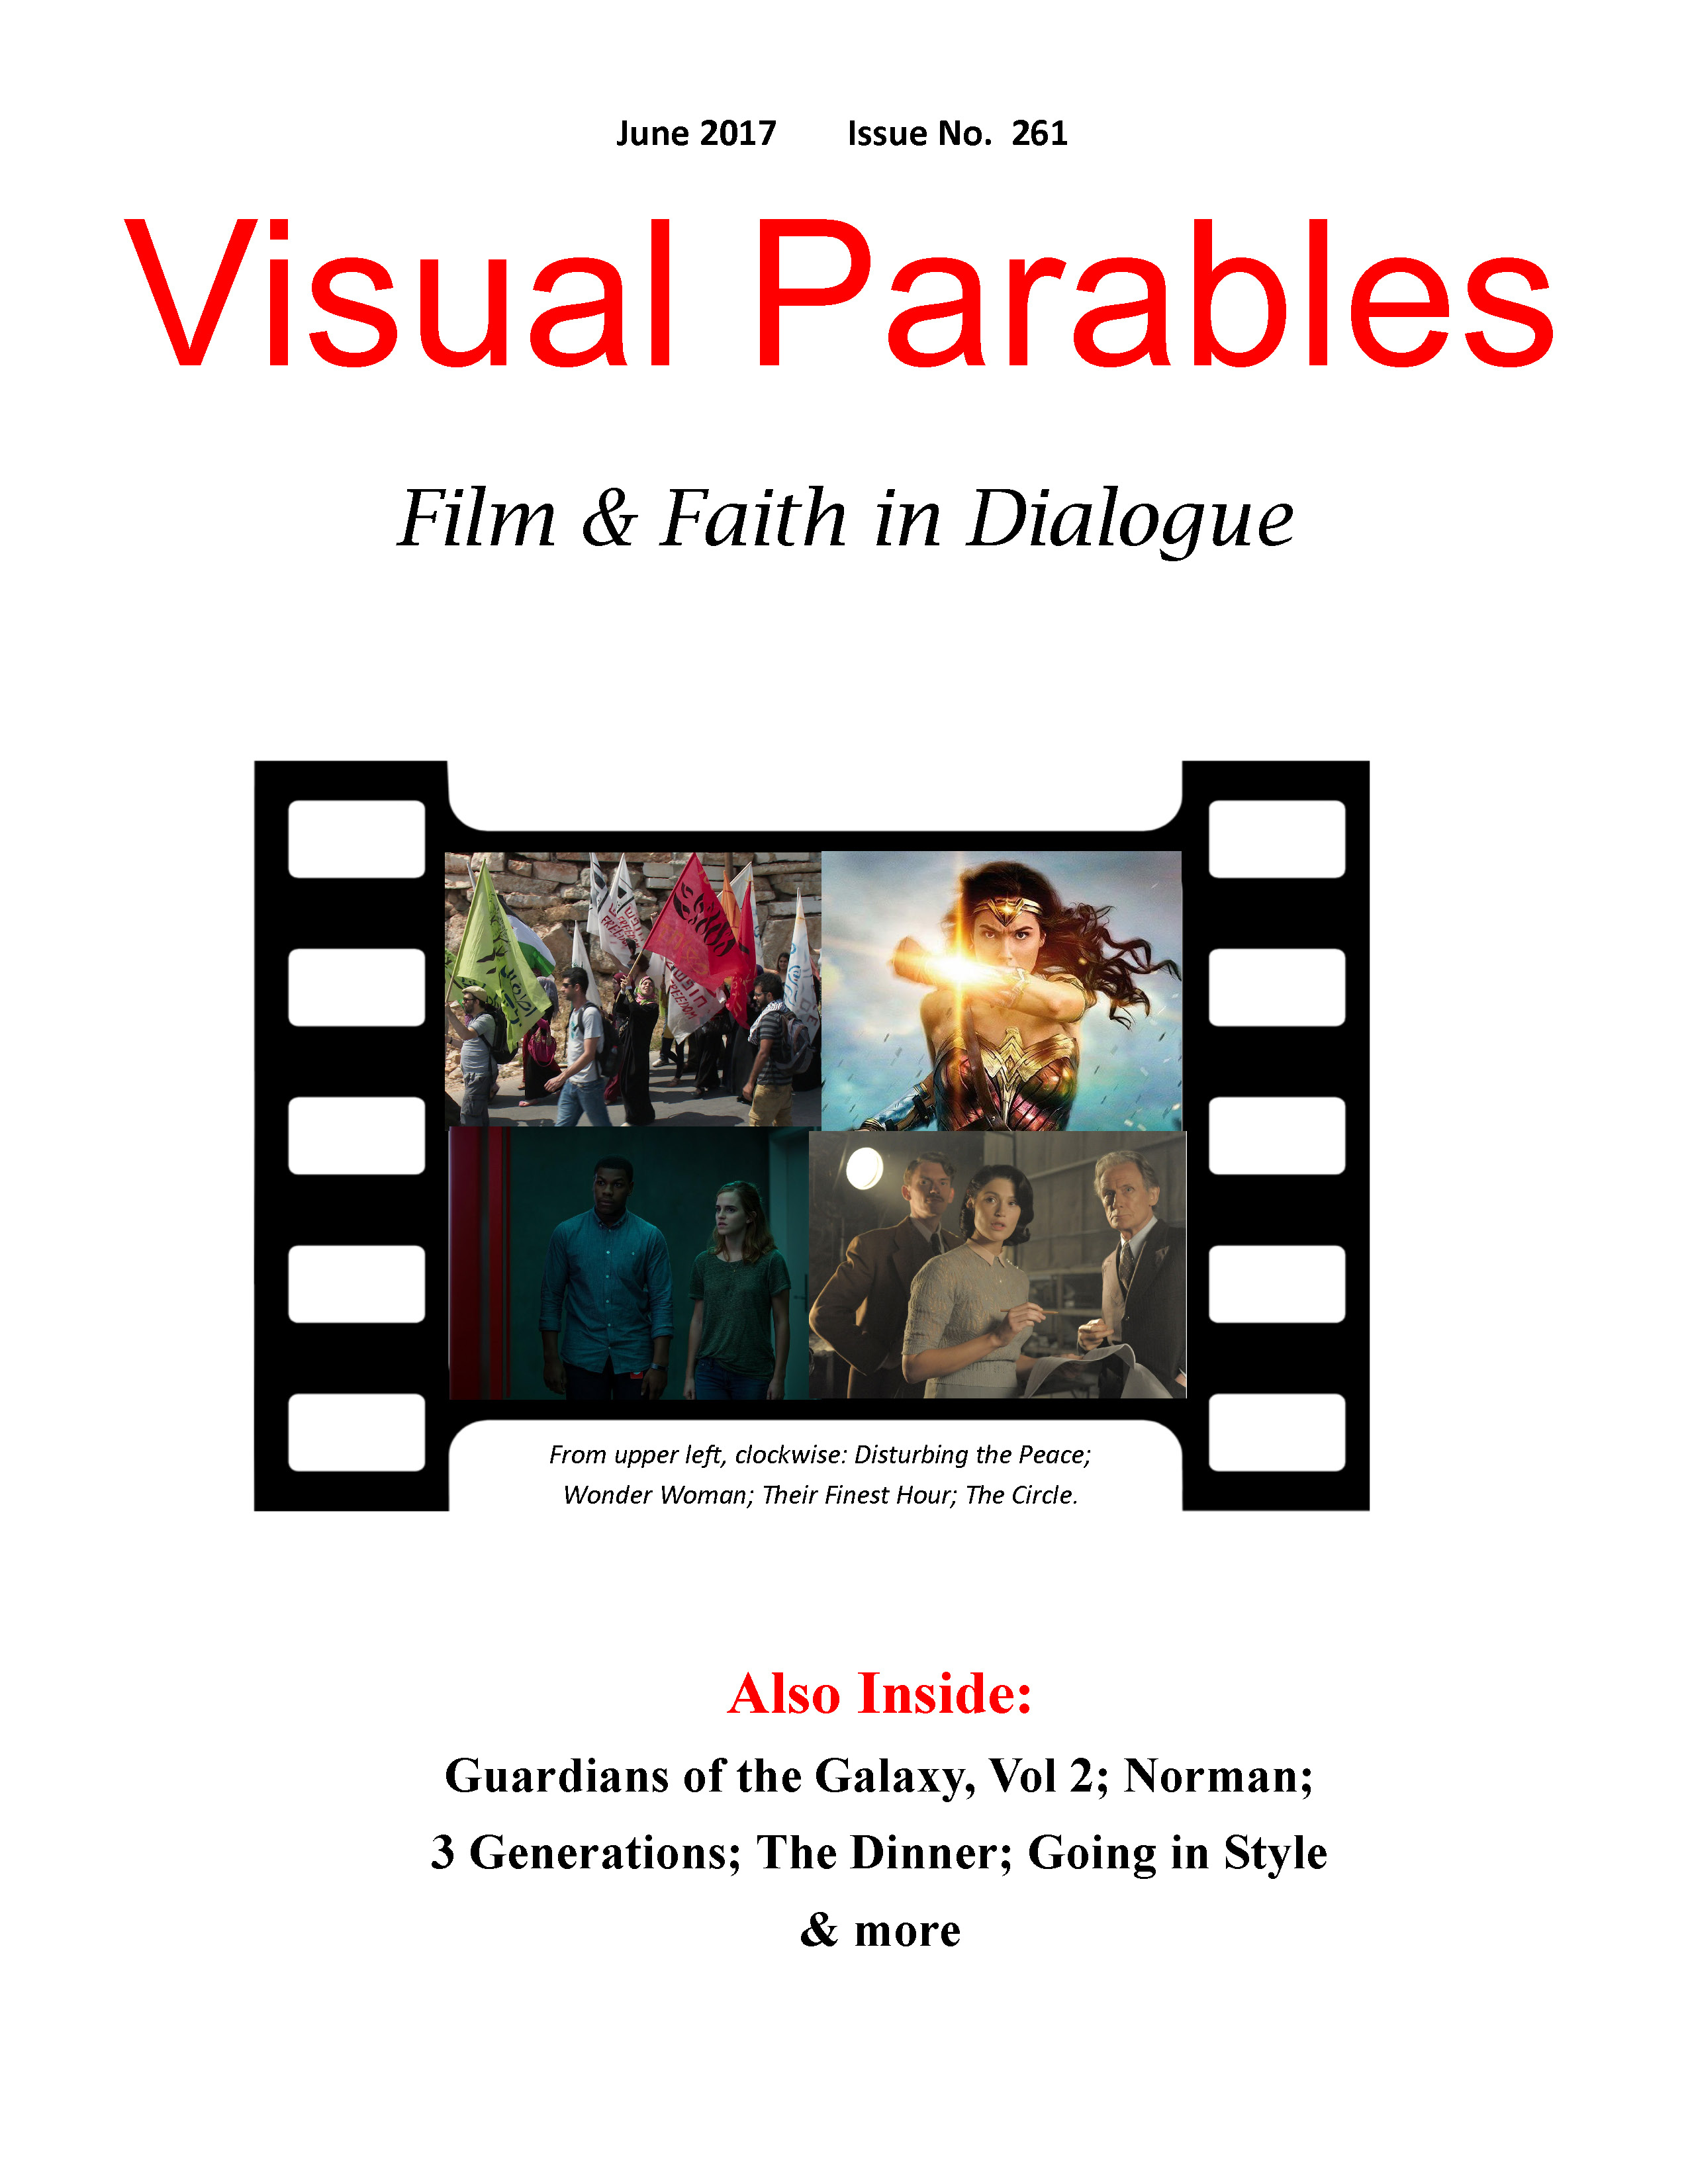 June 2017 issue of Visual Parables